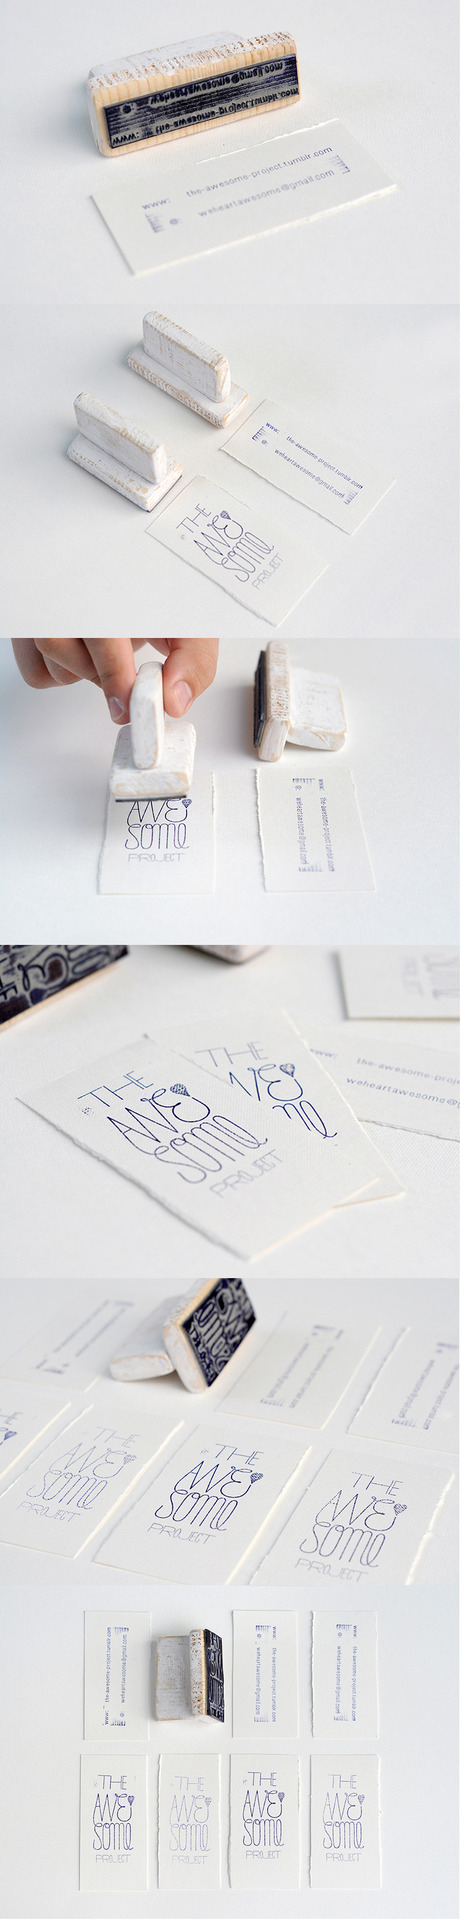 Hand-Made Awesome Business Cards